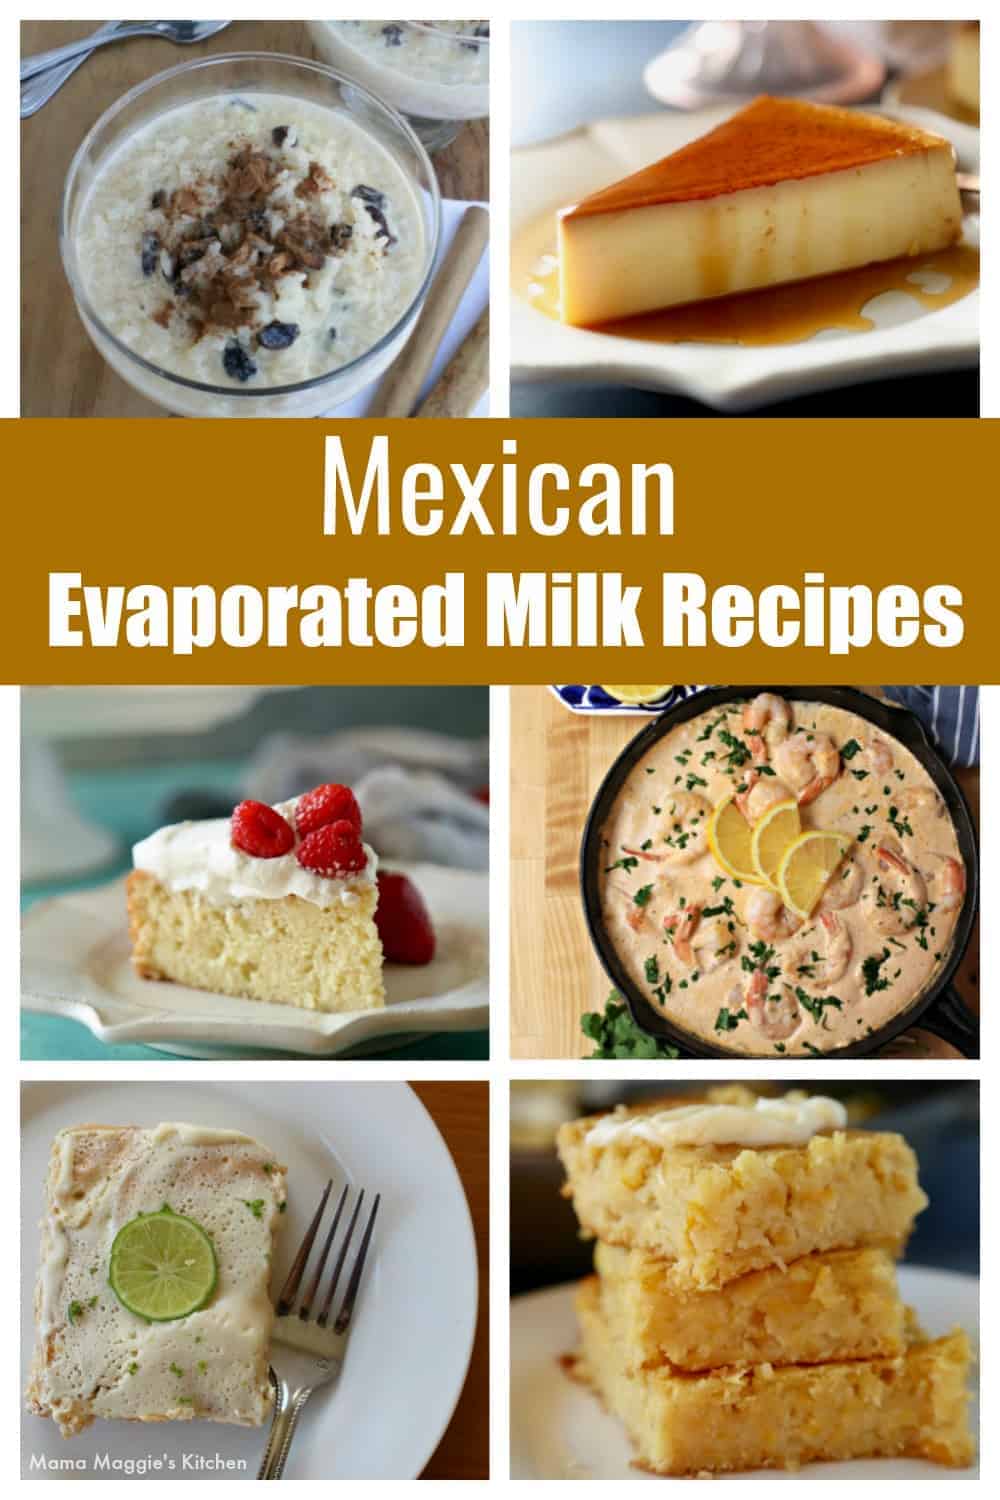 A collage showing Mexican evaporated milk recipes.